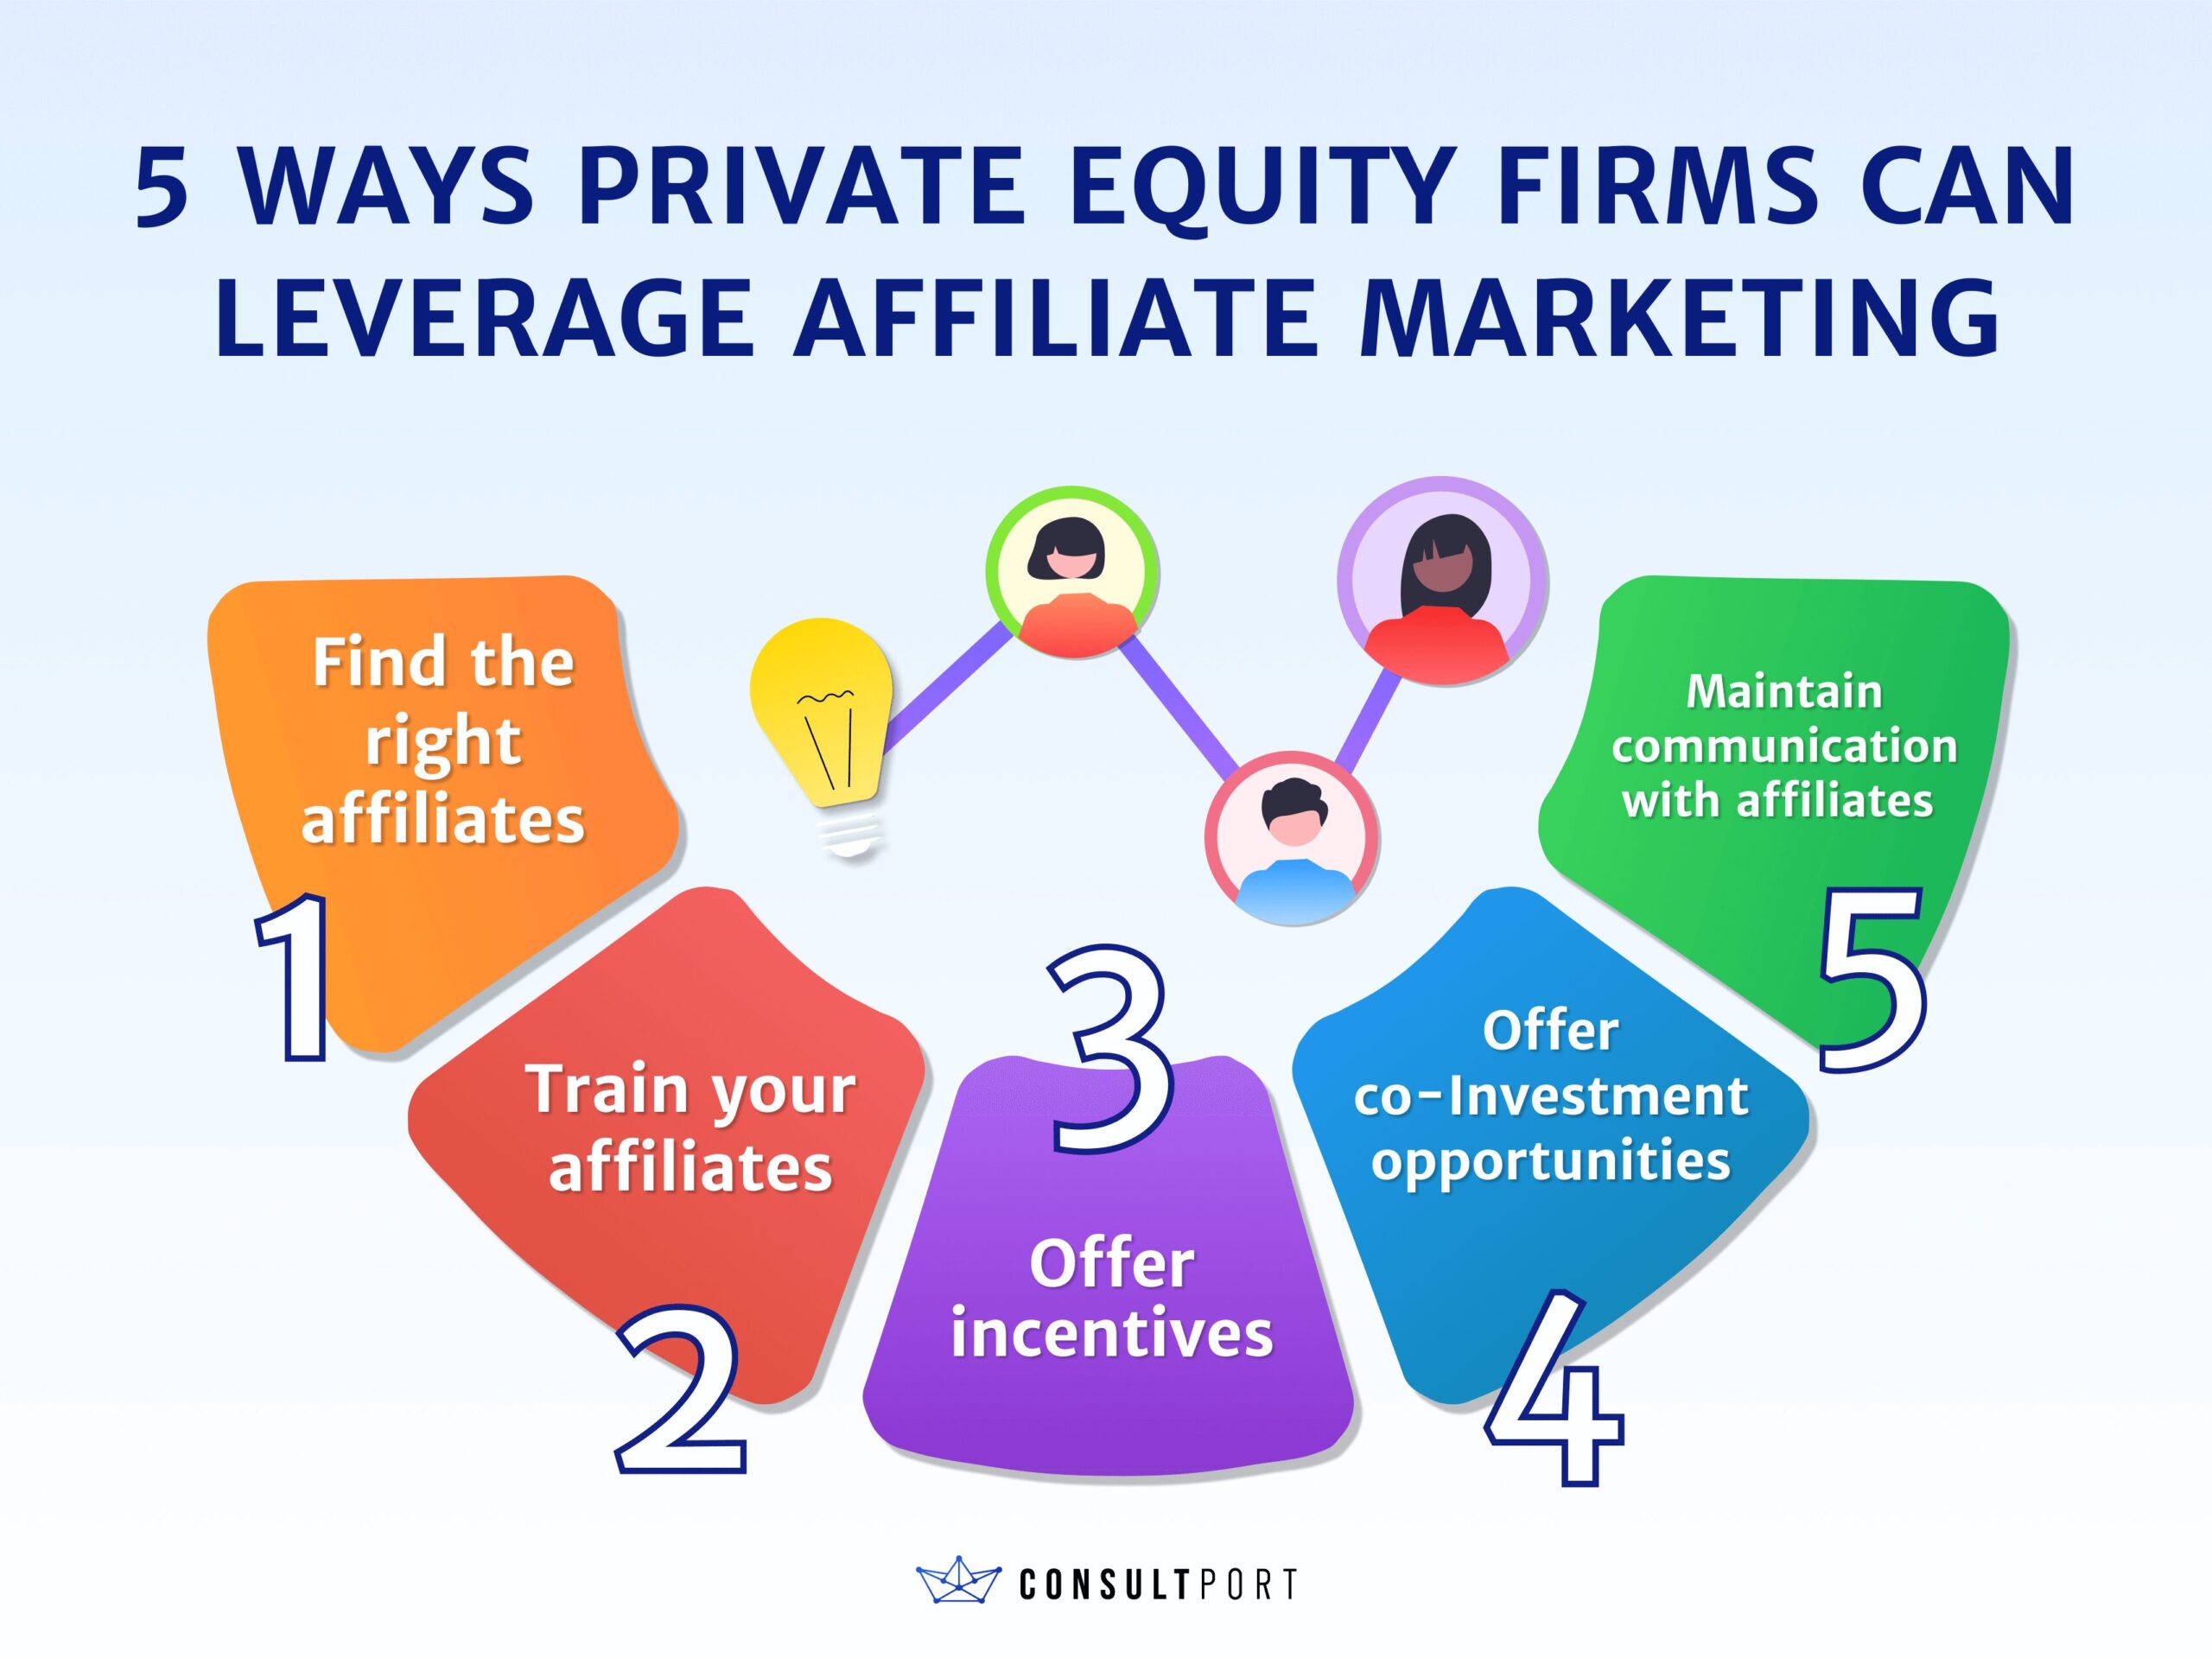 5 Ways Private Equity Firms Can Leverage Affiliate Marketing